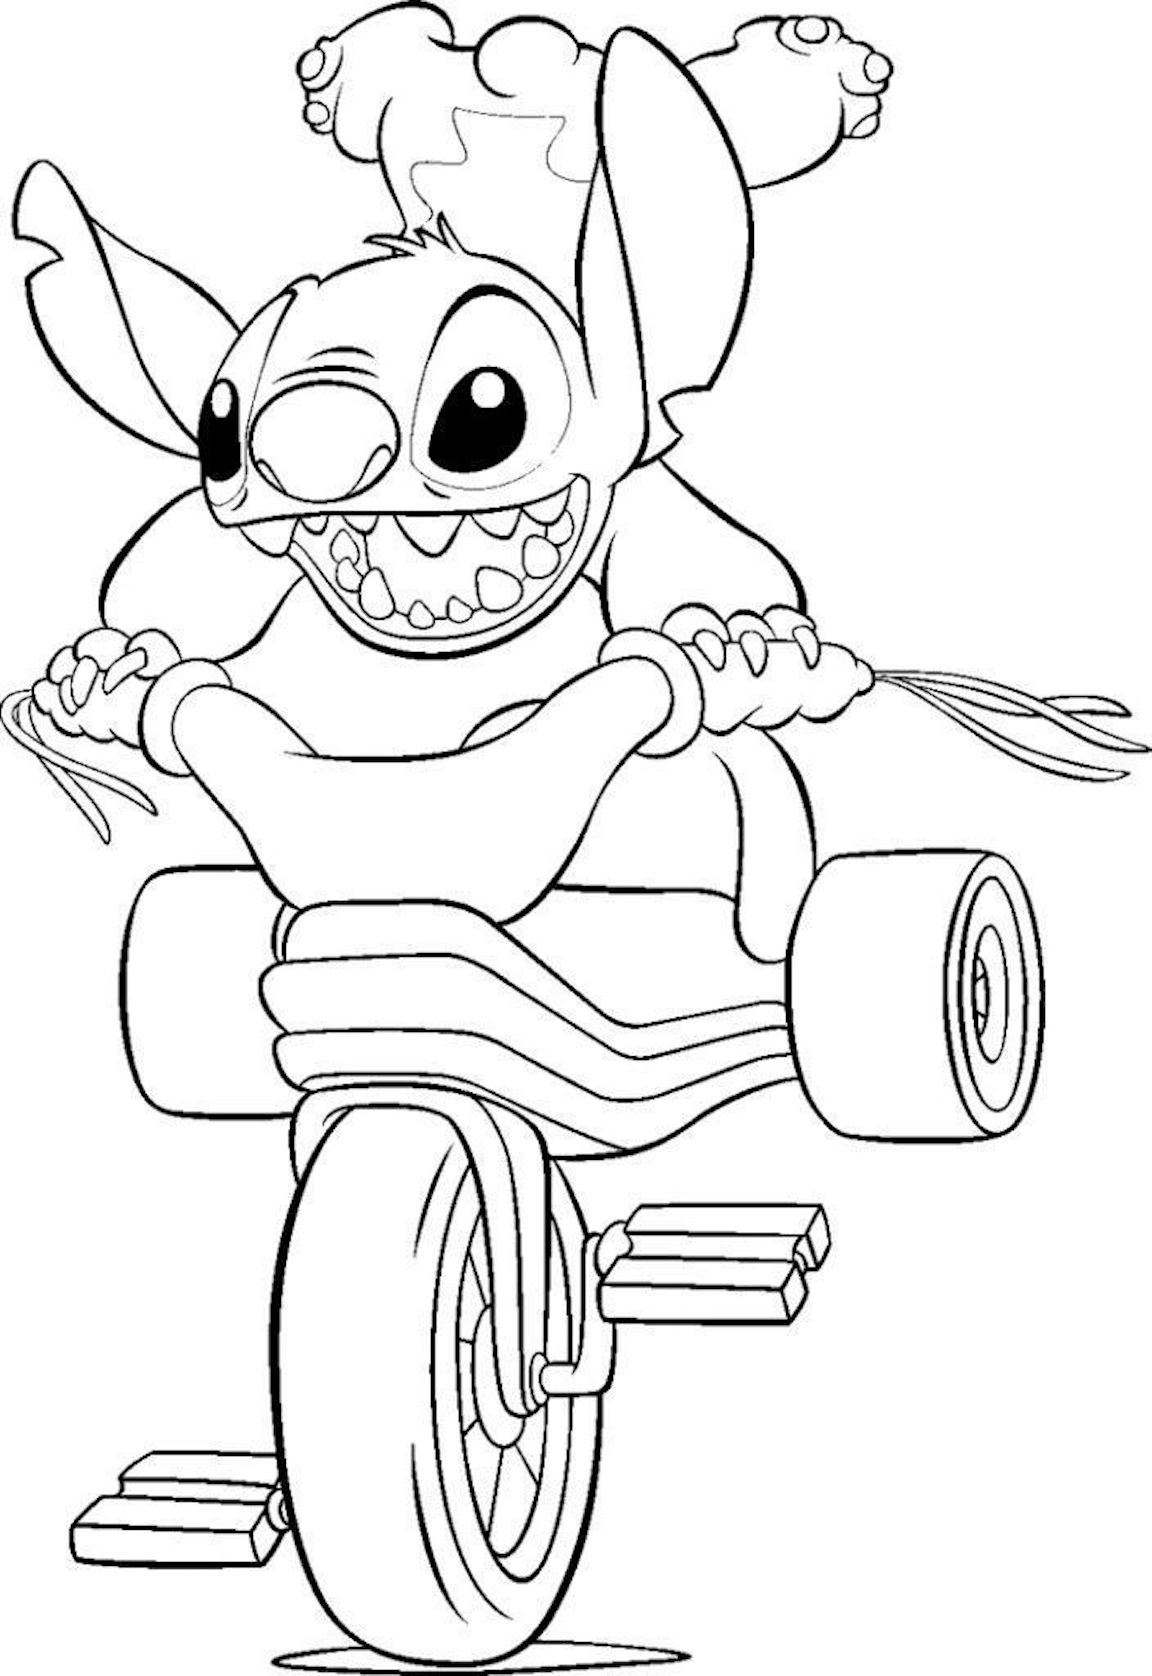 Lilo And Stitch Coloring Pages And Other Top 10 Coloring Themes